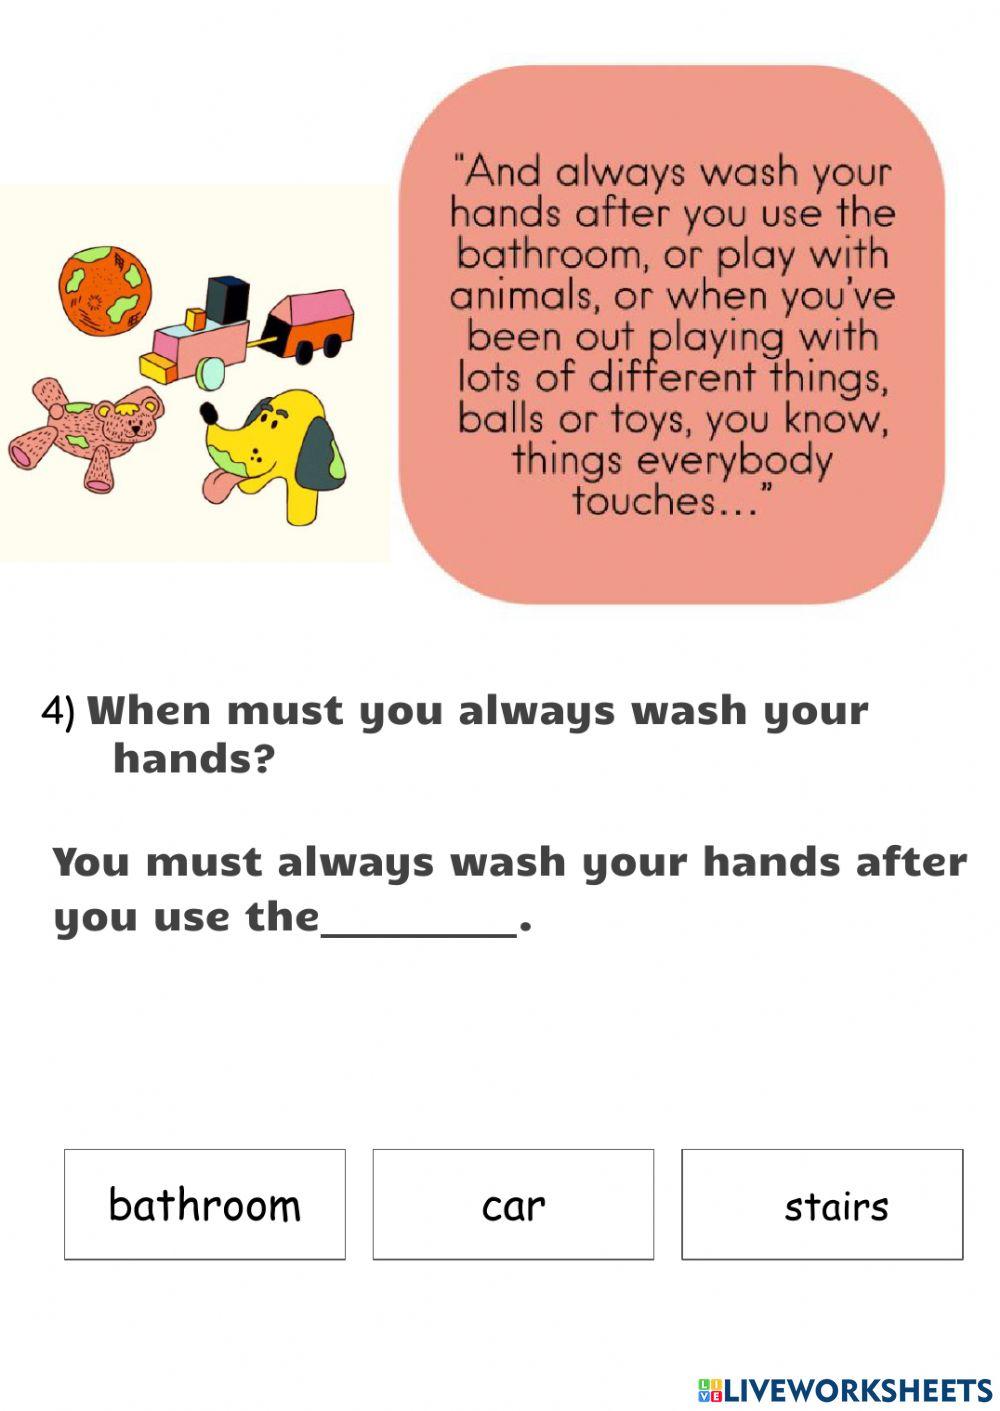 Watch out for germs - worksheet 2